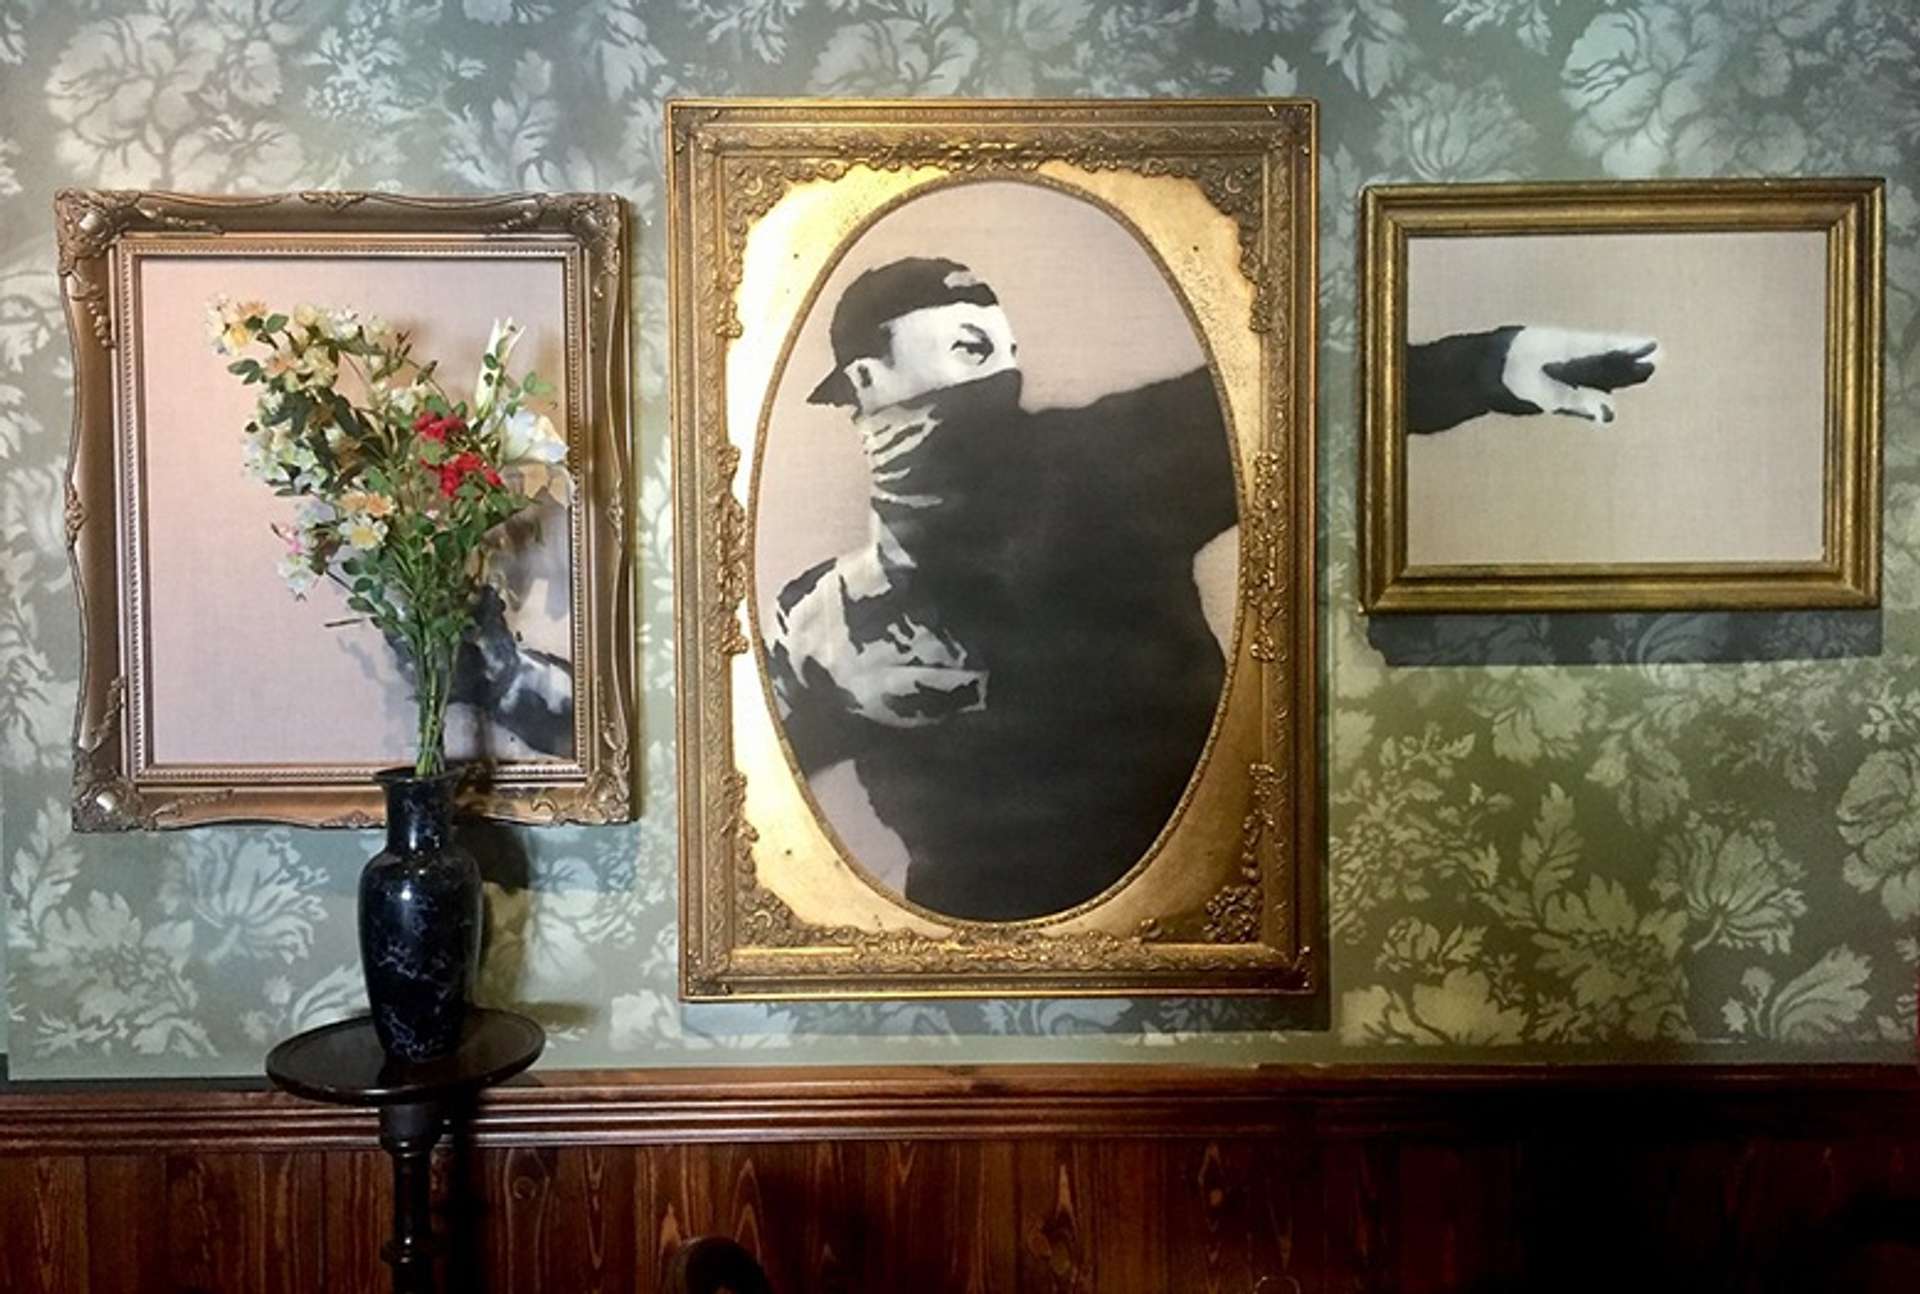 Flower Thrower (Walled Off Hotel) by Banksy